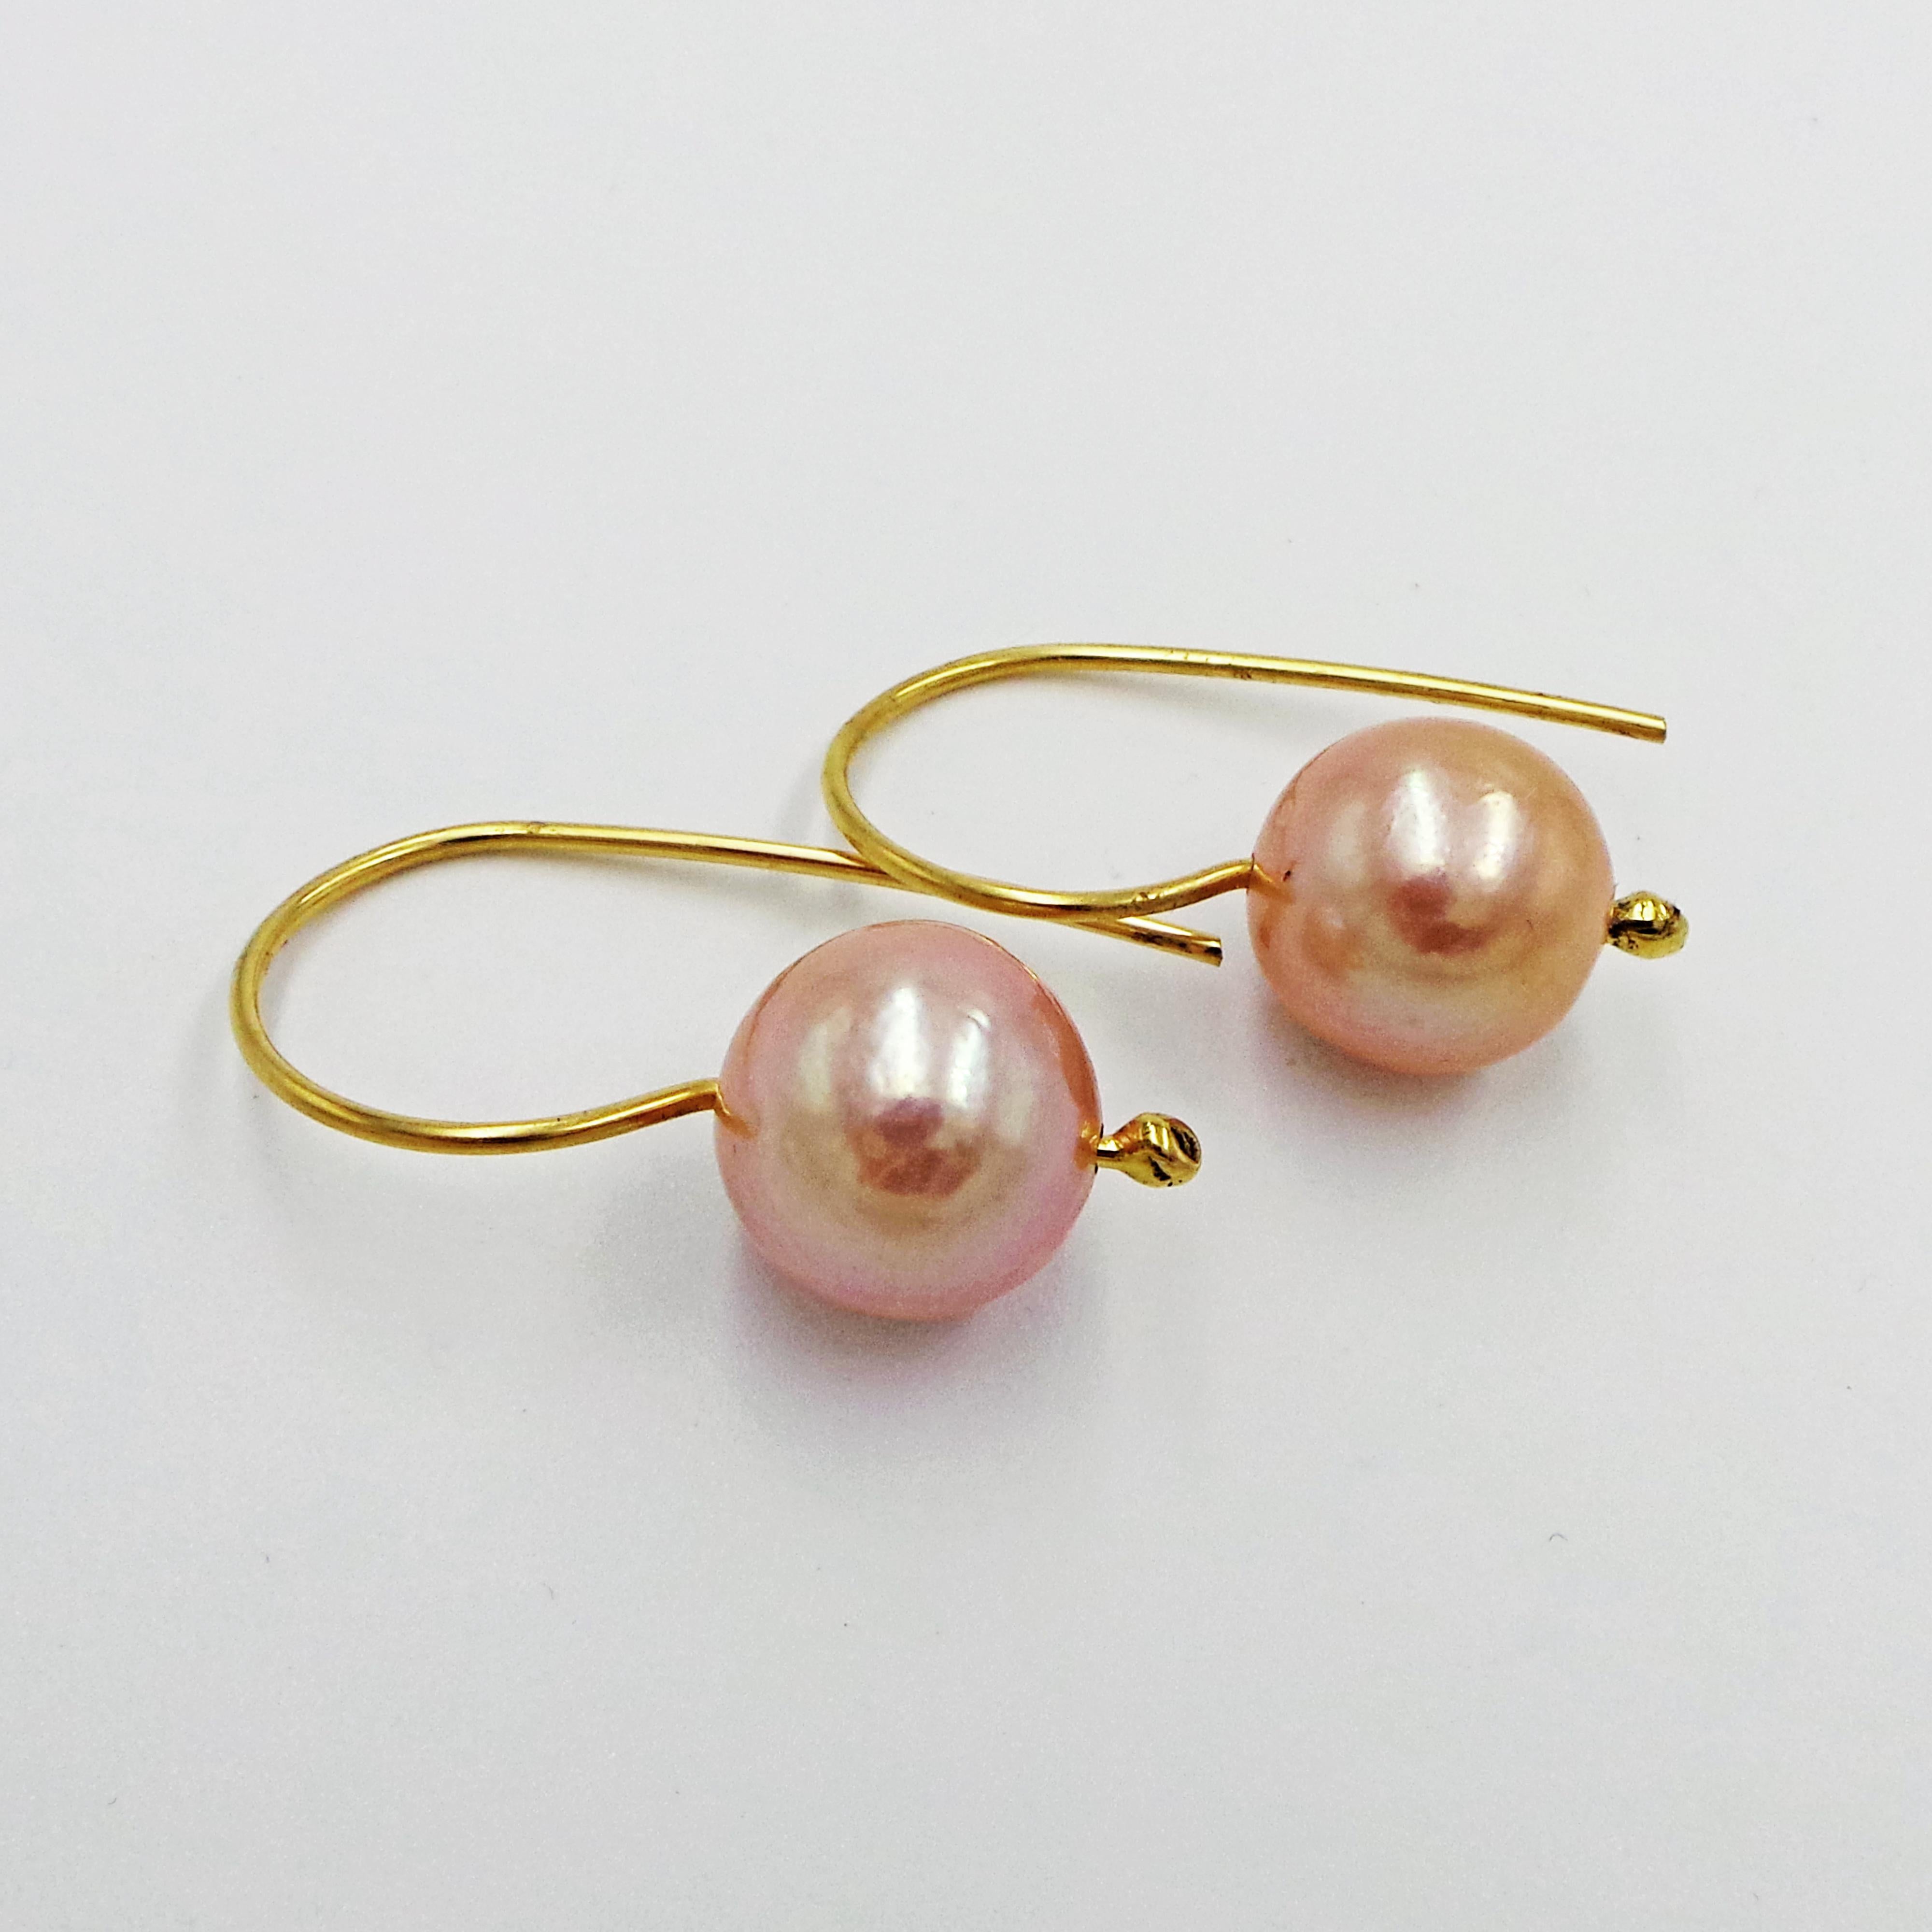 Round, Freshwater Pearls (12.5mm) with peach / pink color on solid 18k yellow gold French wire drop earrings. Perfect for everyday, or to dress up.